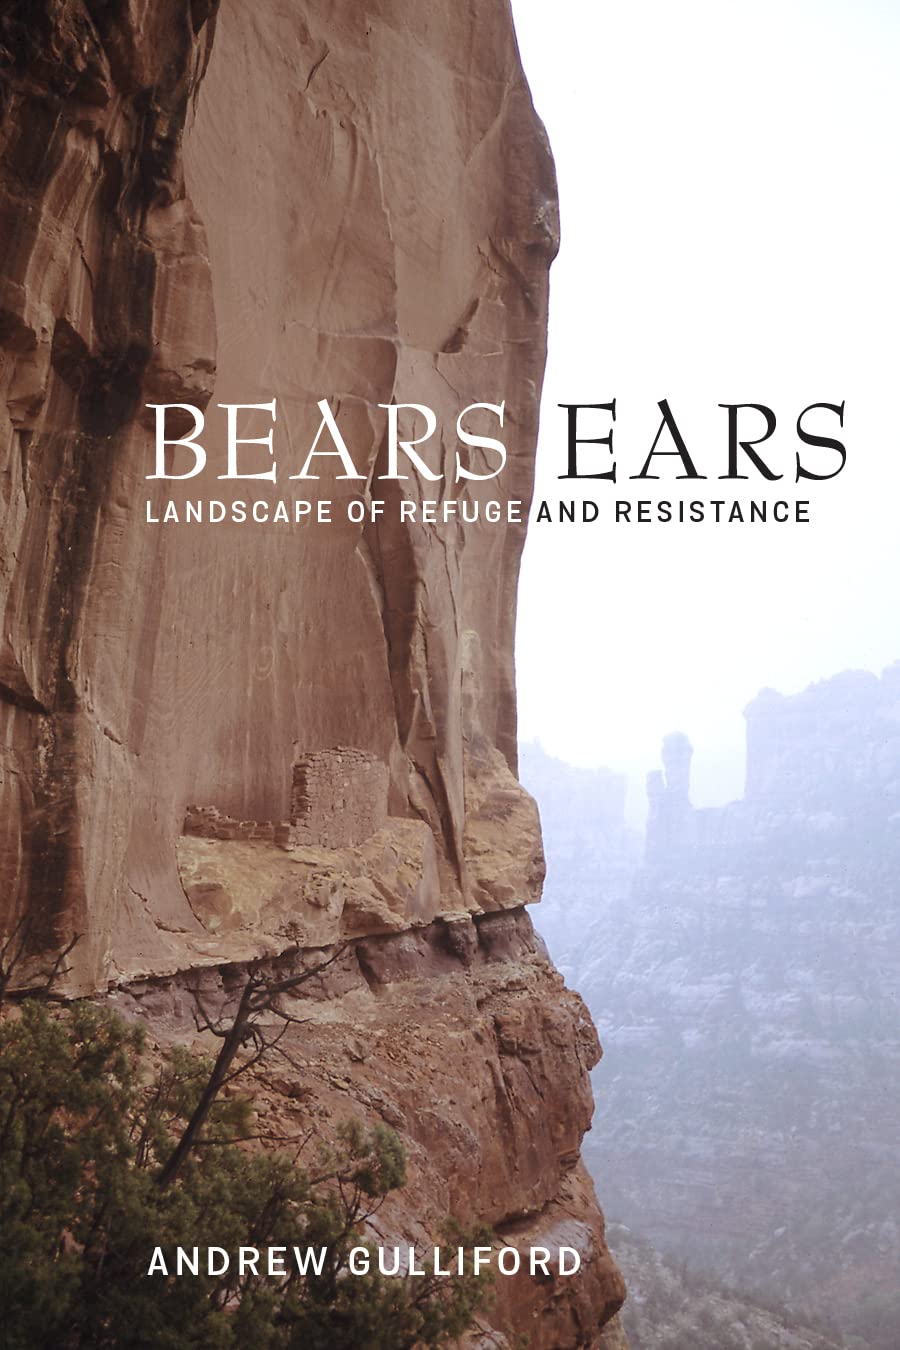 Bears Ears: Landscape of Refuge and Resistance by Andrew Gulliford